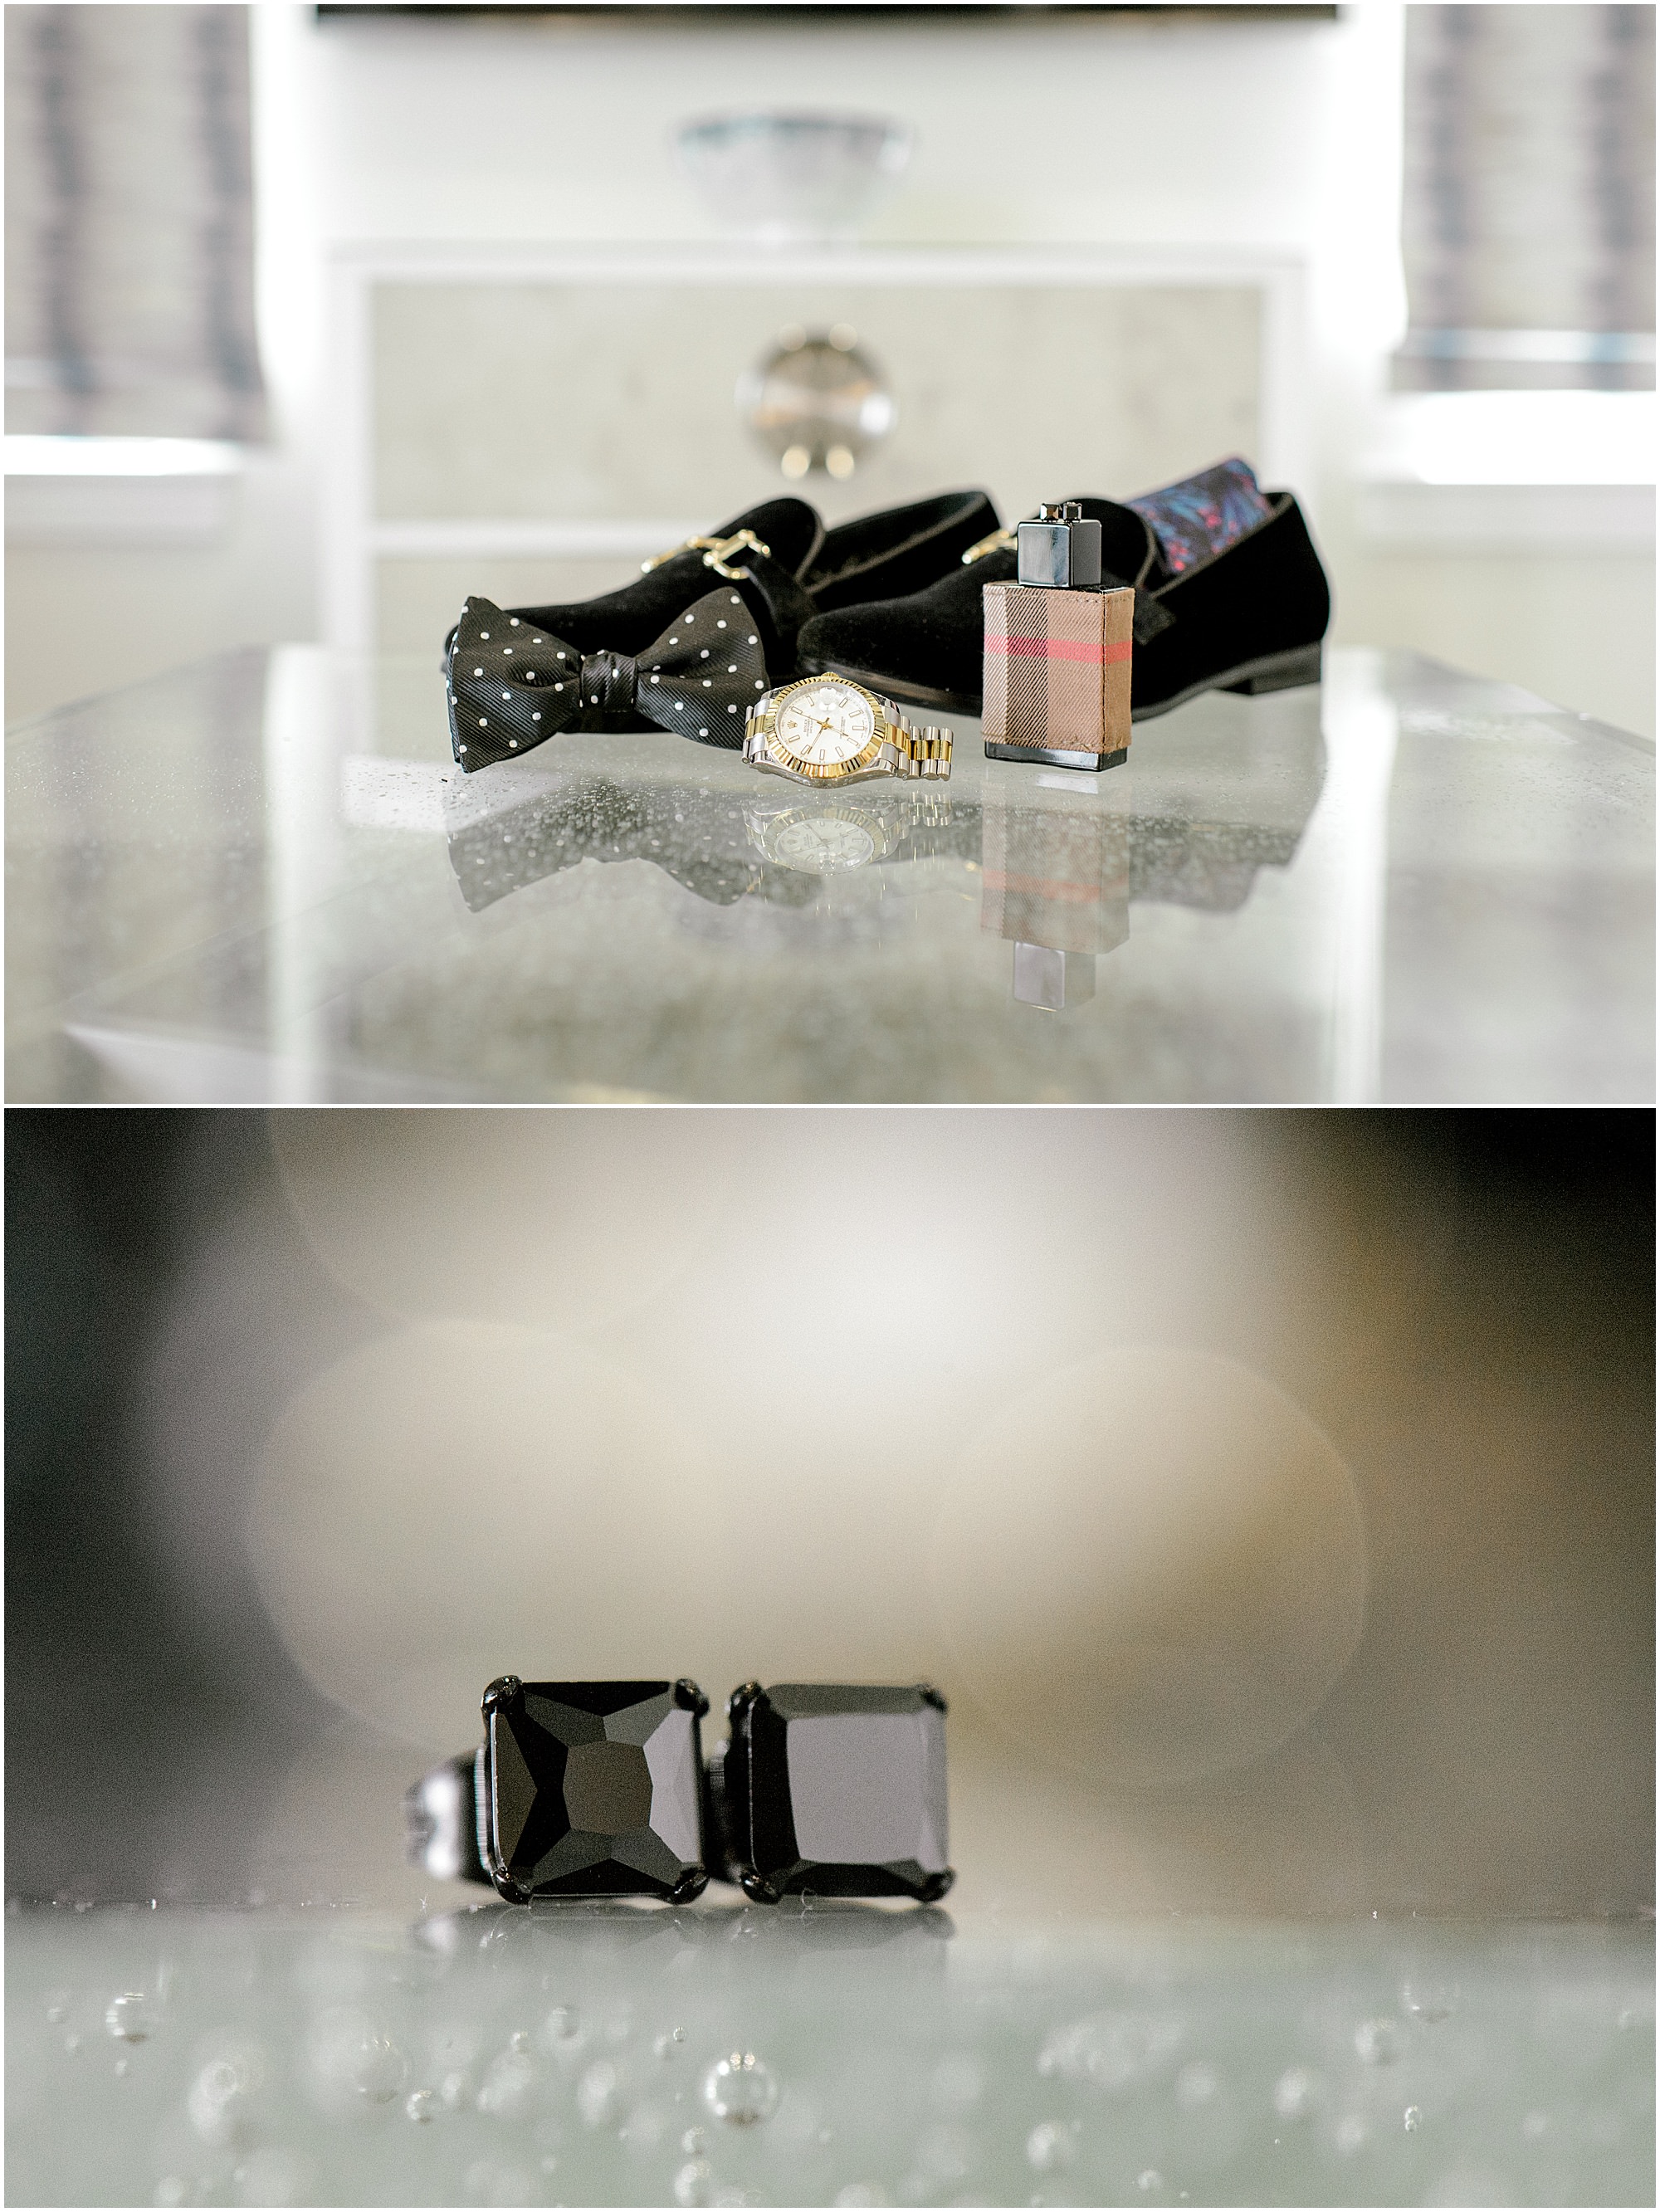 Groom's details like cufflinks and a bowtie